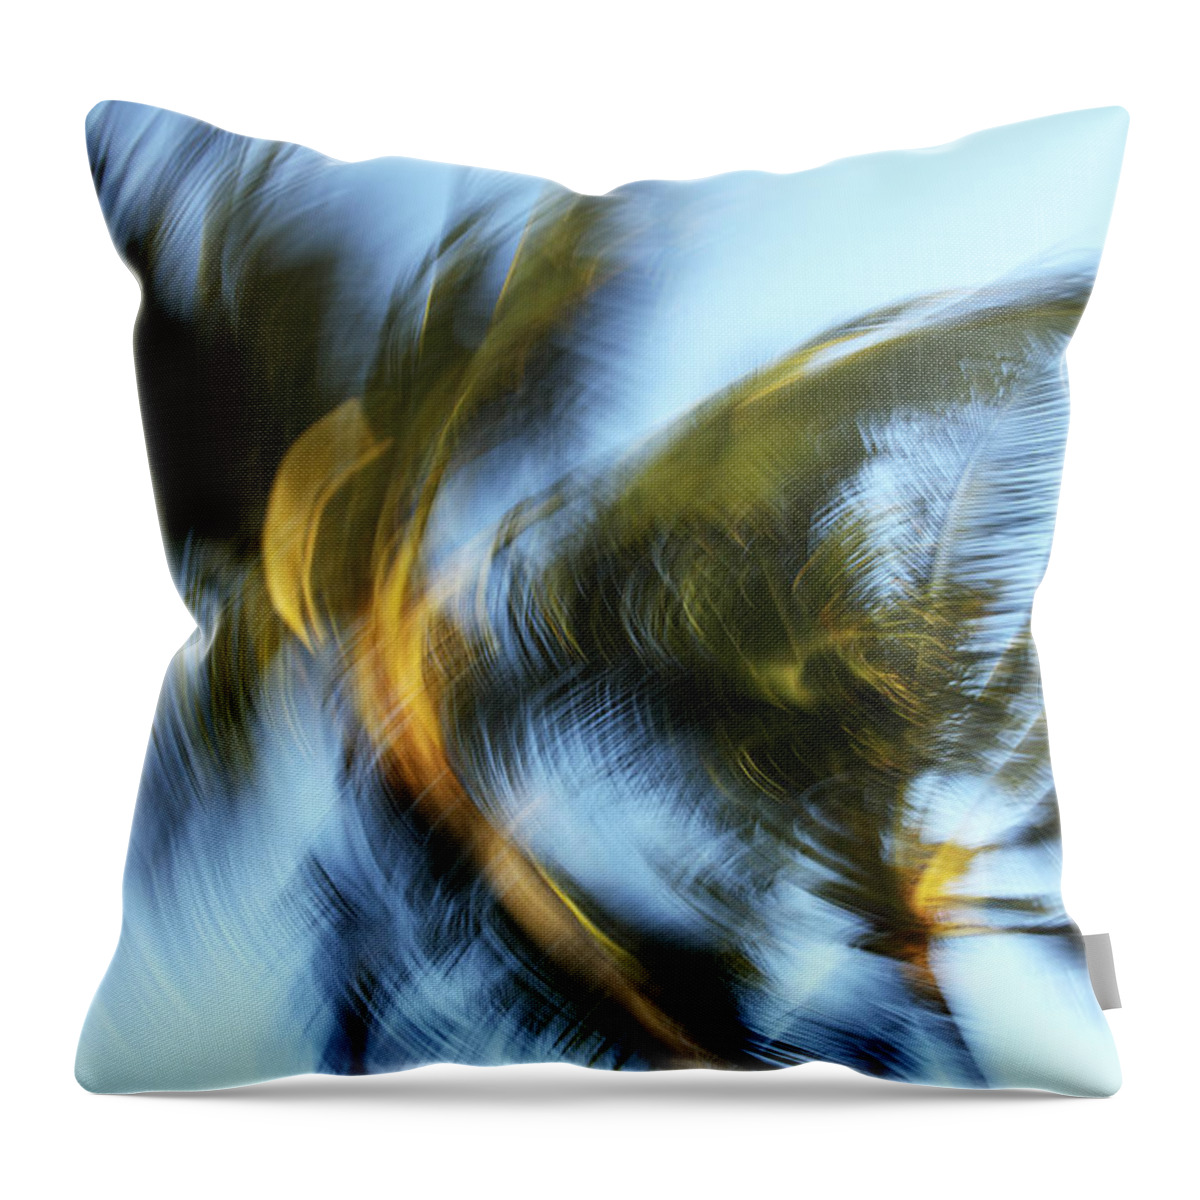 Abstract Throw Pillow featuring the photograph Blurred Palm Trees #1 by Vince Cavataio - Printscapes